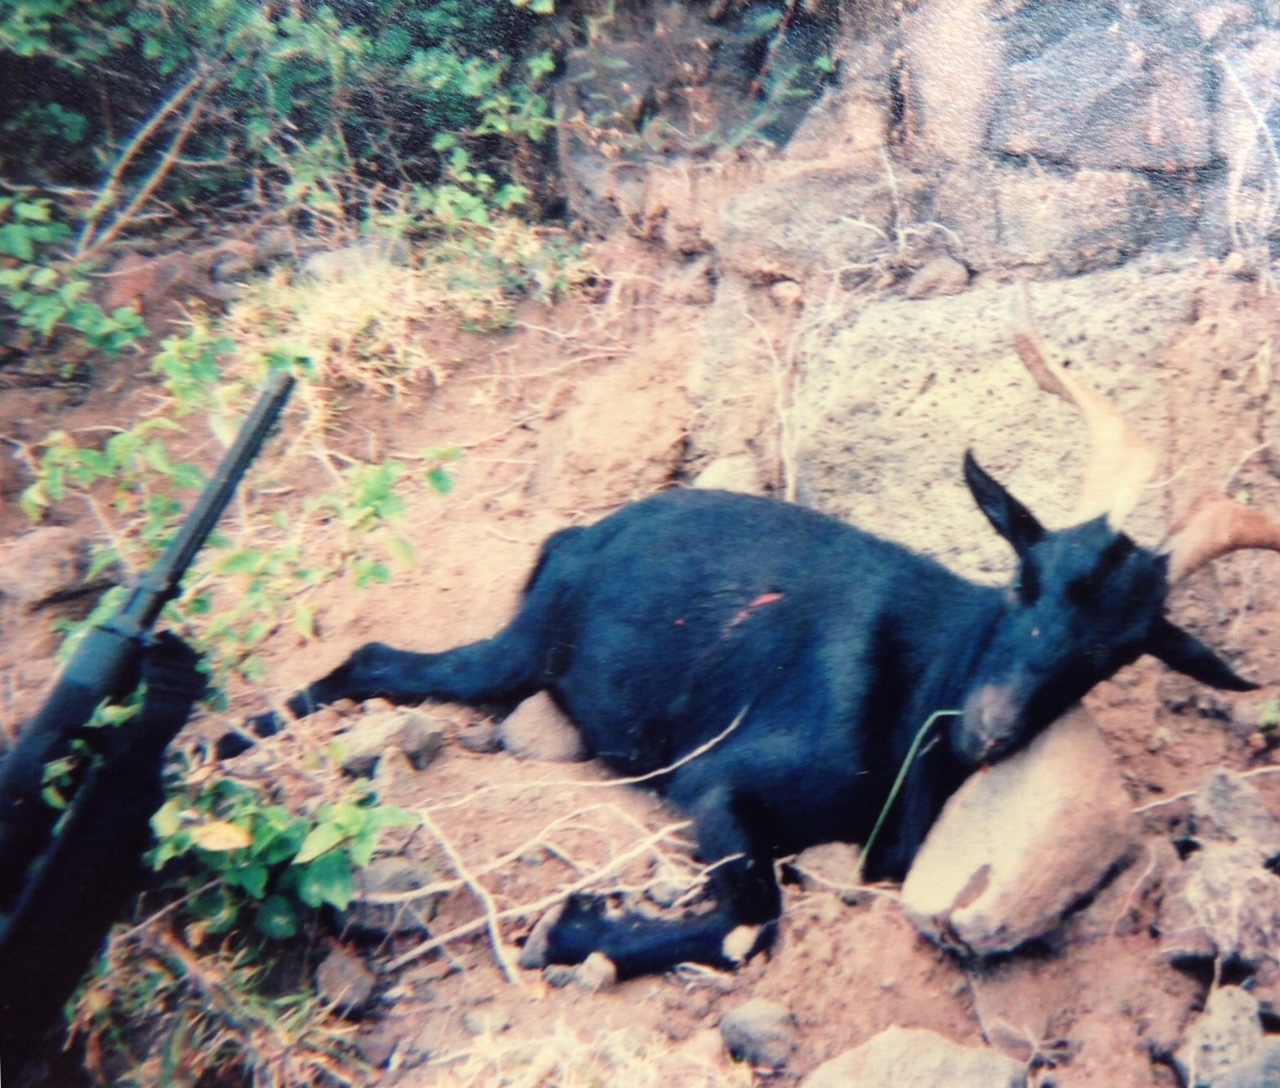 A goat killed in 2003 in the mountains on Kauai, the fourth largest Hawaiian island, with an AR-15. ((Jay Perreira))